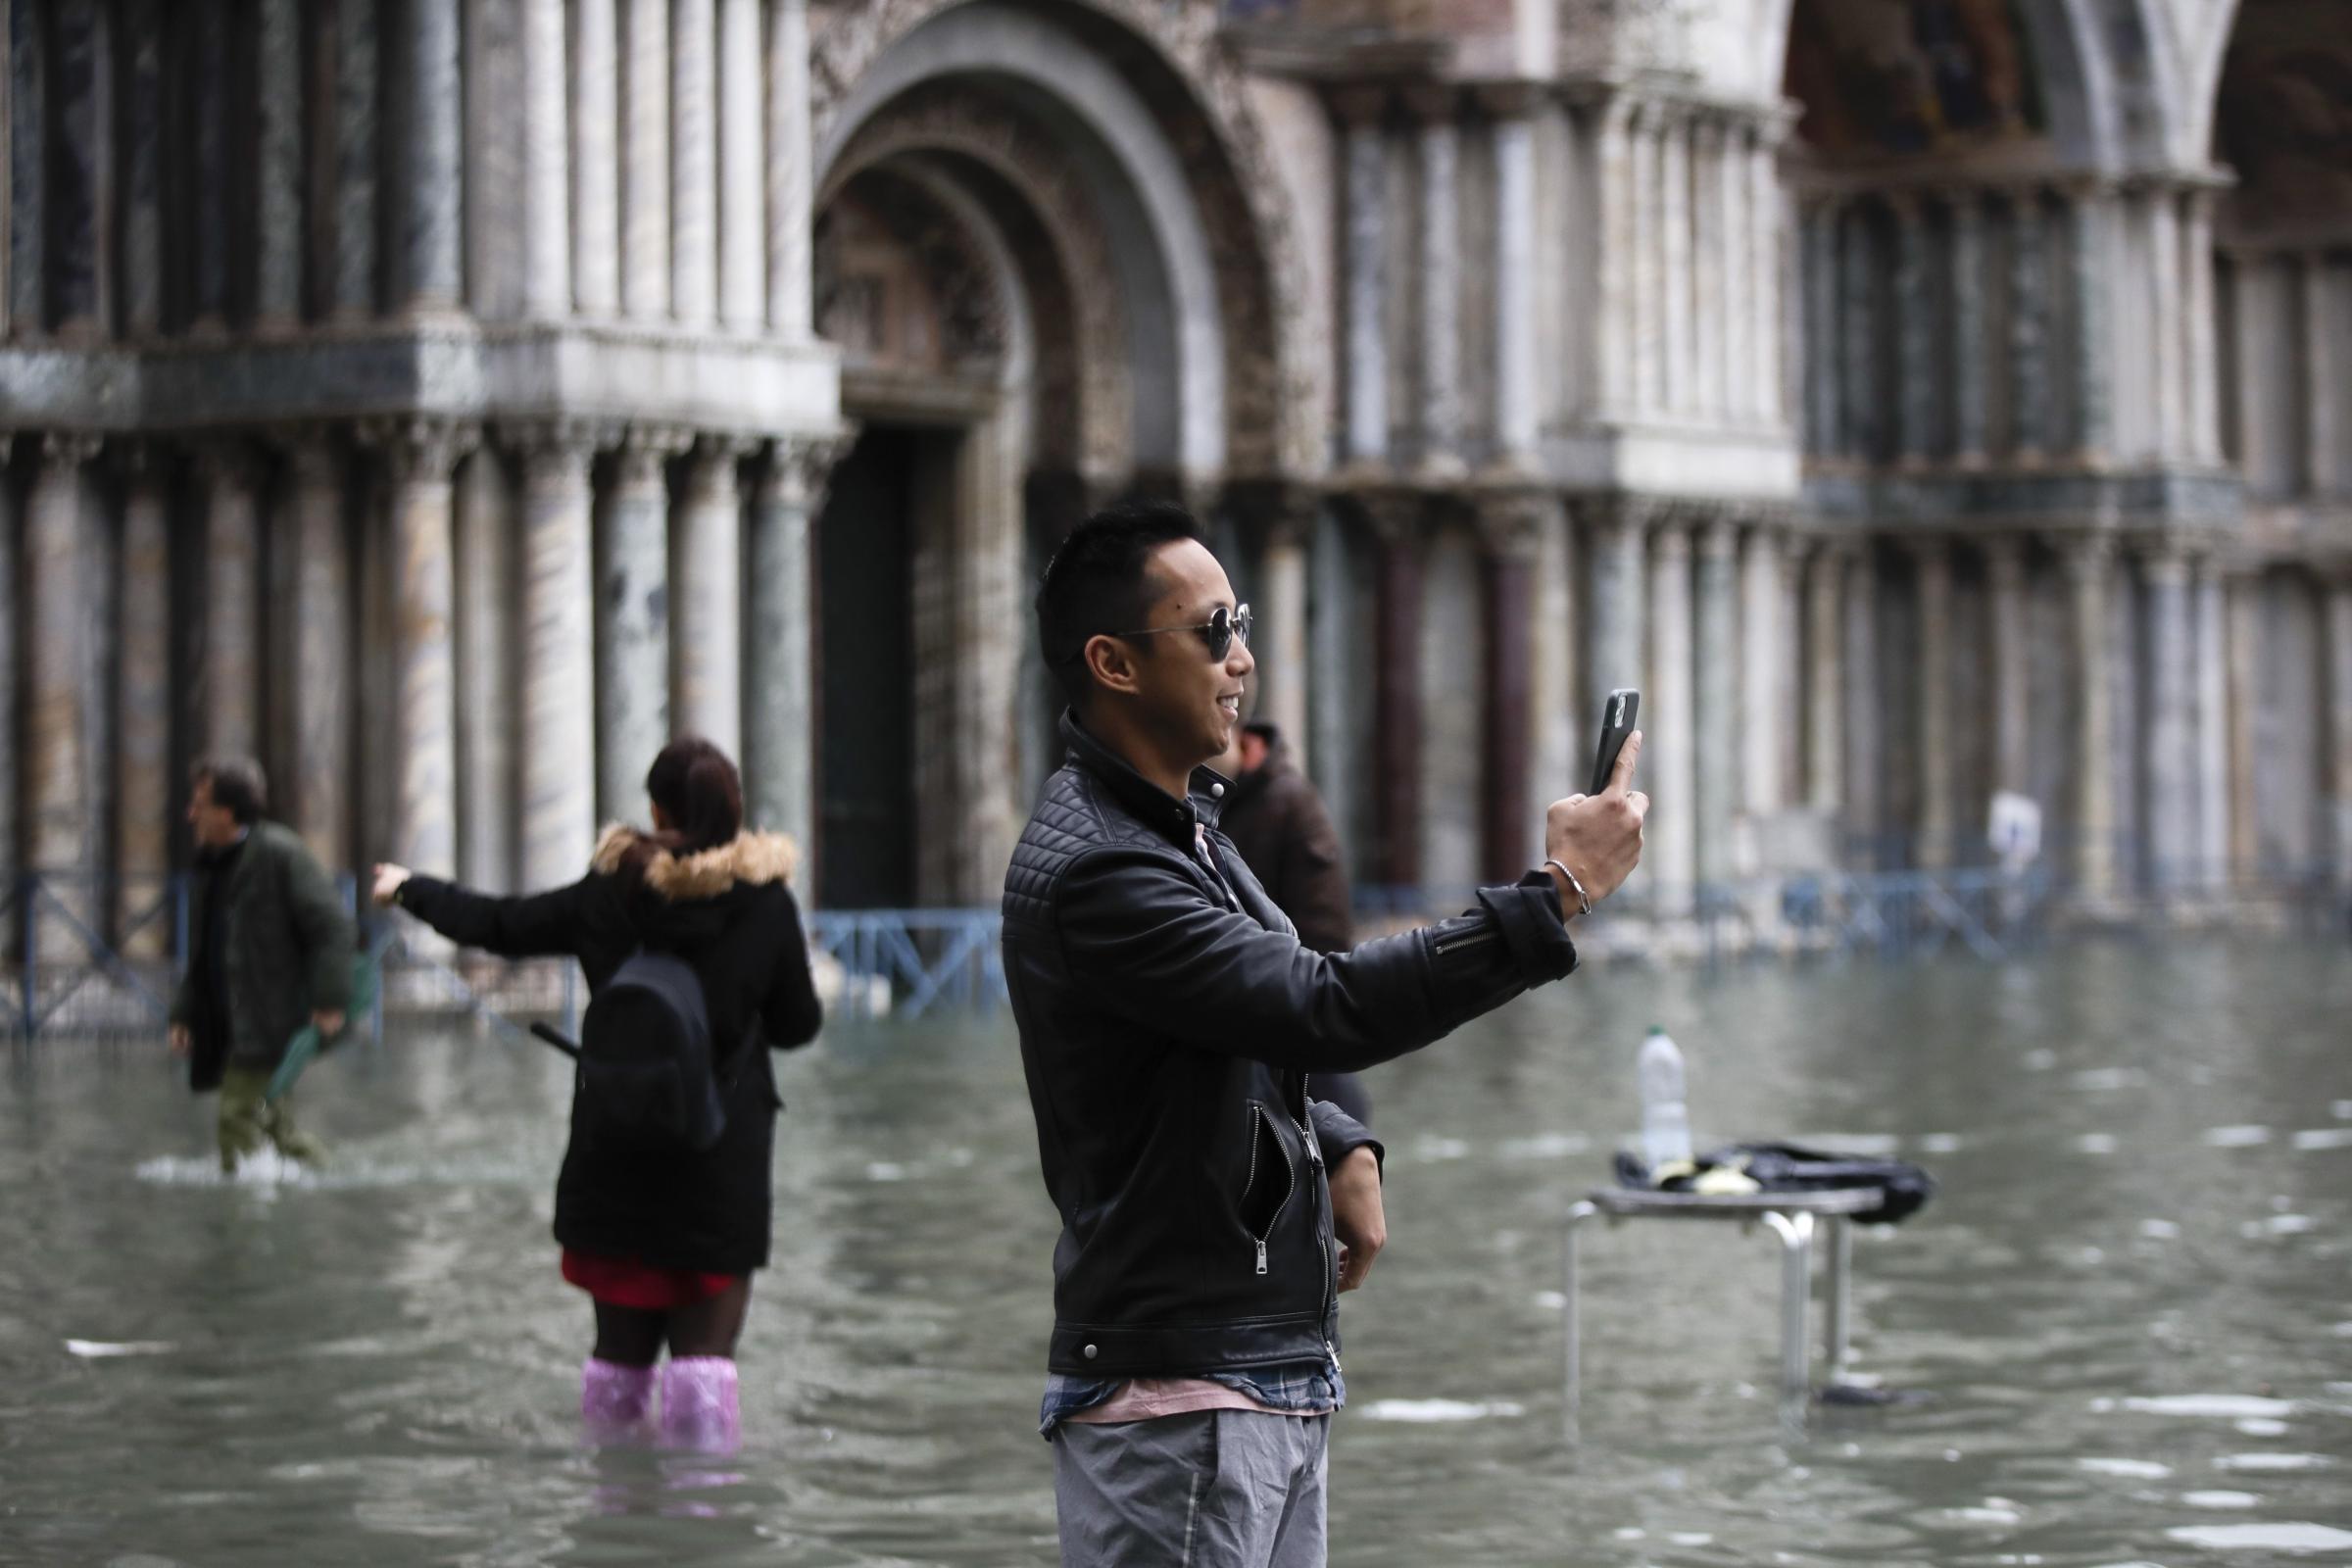 St Mark's Square reopens in Venice after flooding forced closure - Ealing Times